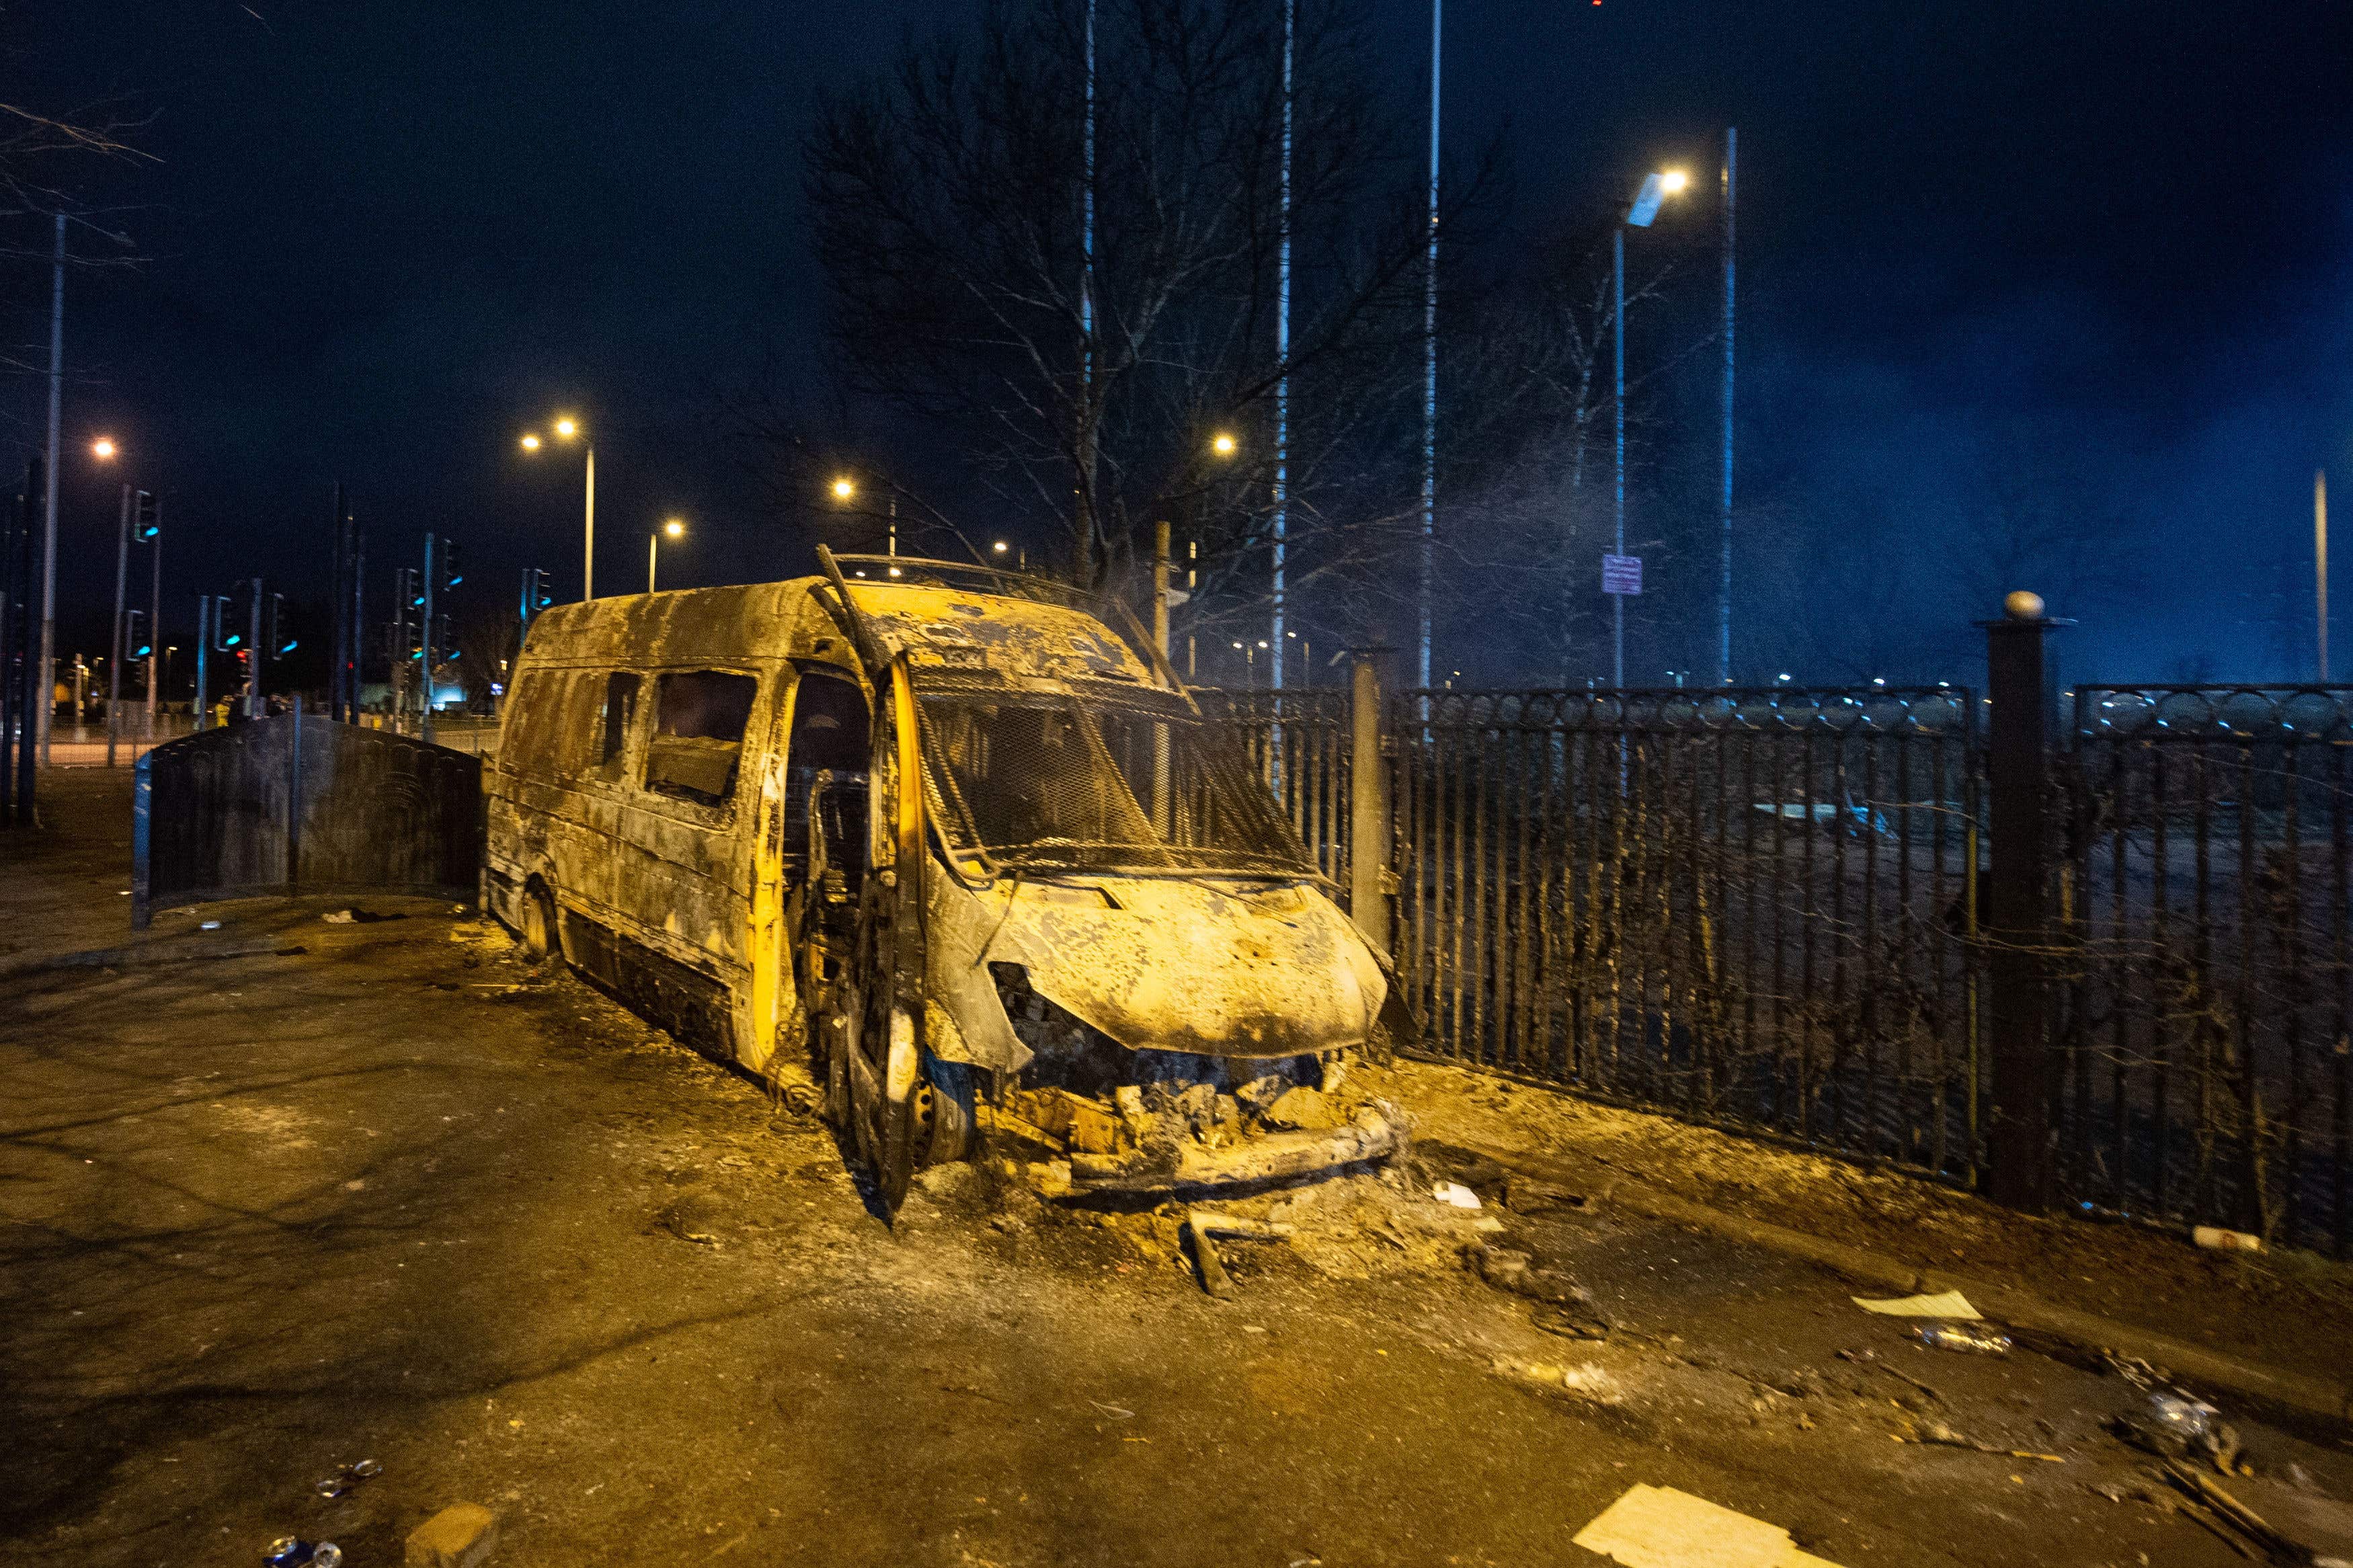 A police van was destroyed during the protest outside the hotel